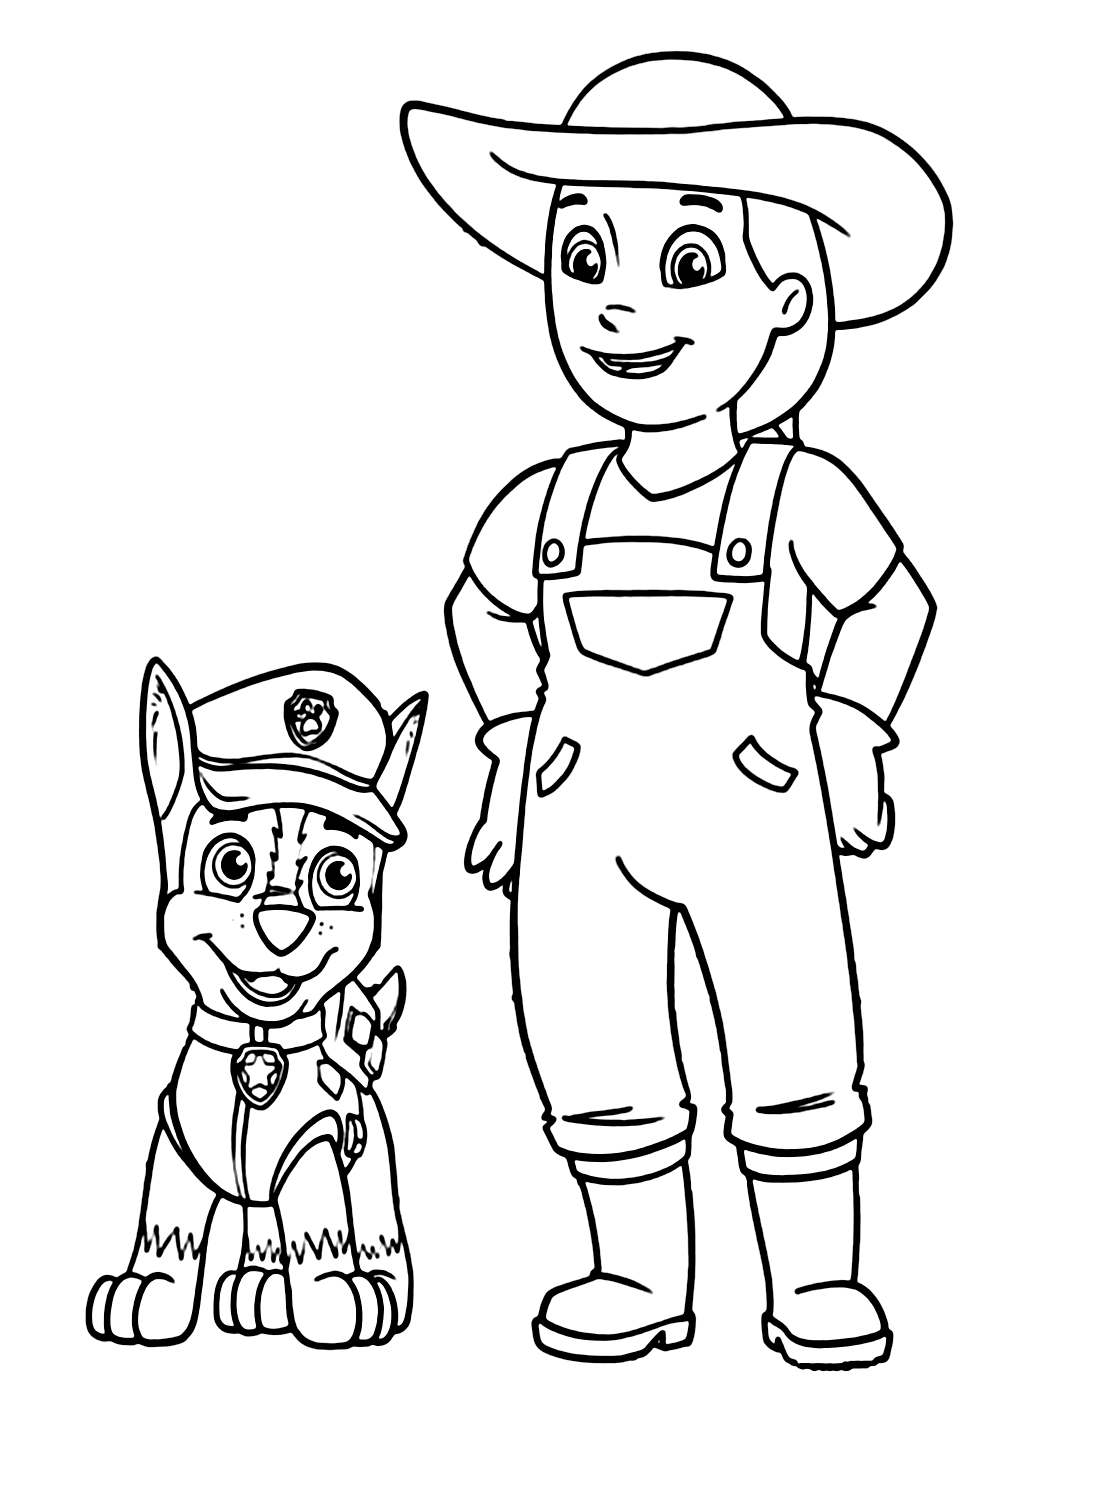 Farmer Yumi with Chase Paw Patrol Coloring Page